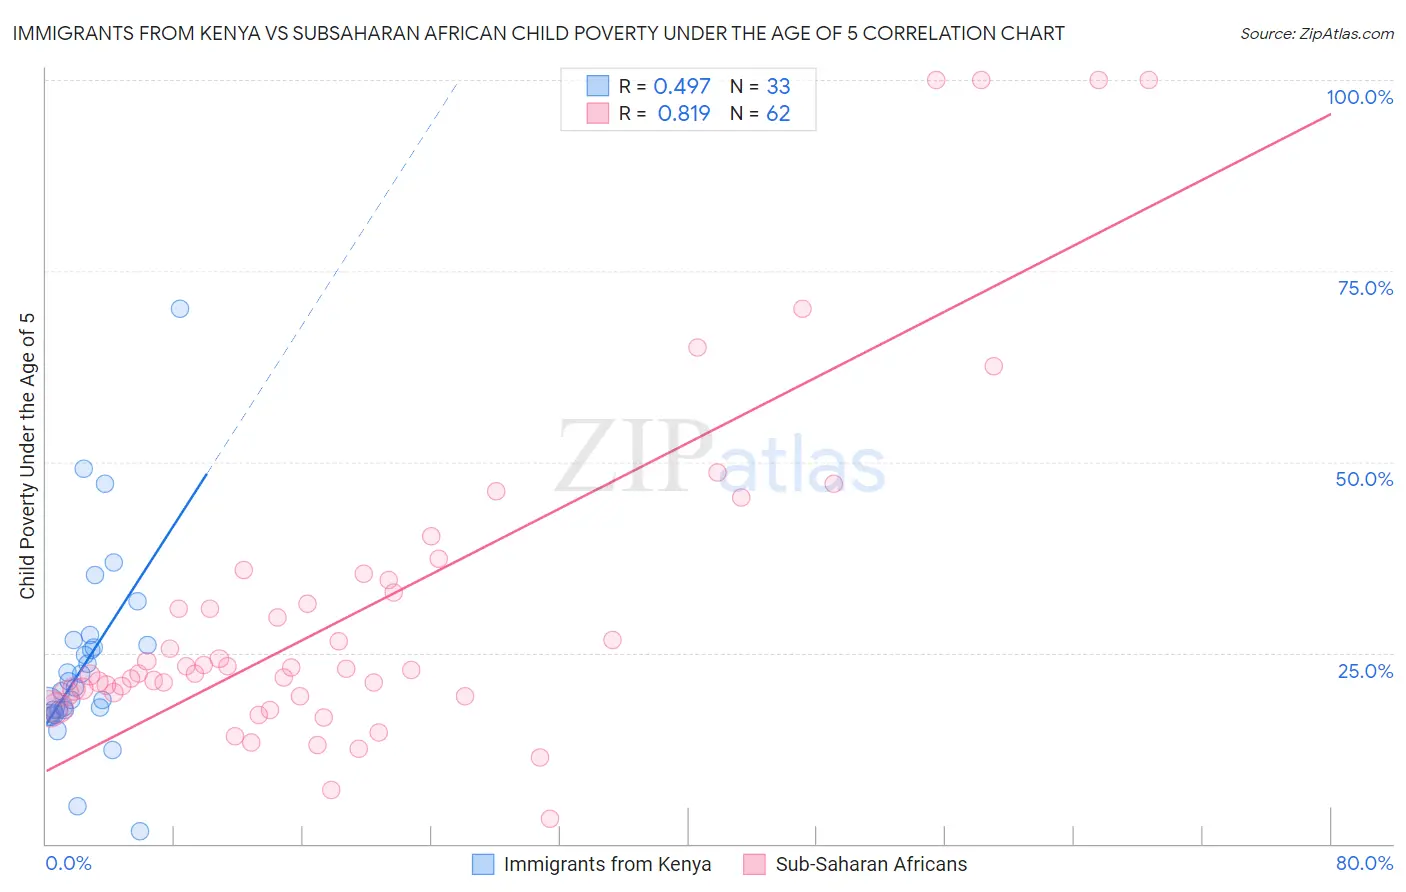 Immigrants from Kenya vs Subsaharan African Child Poverty Under the Age of 5